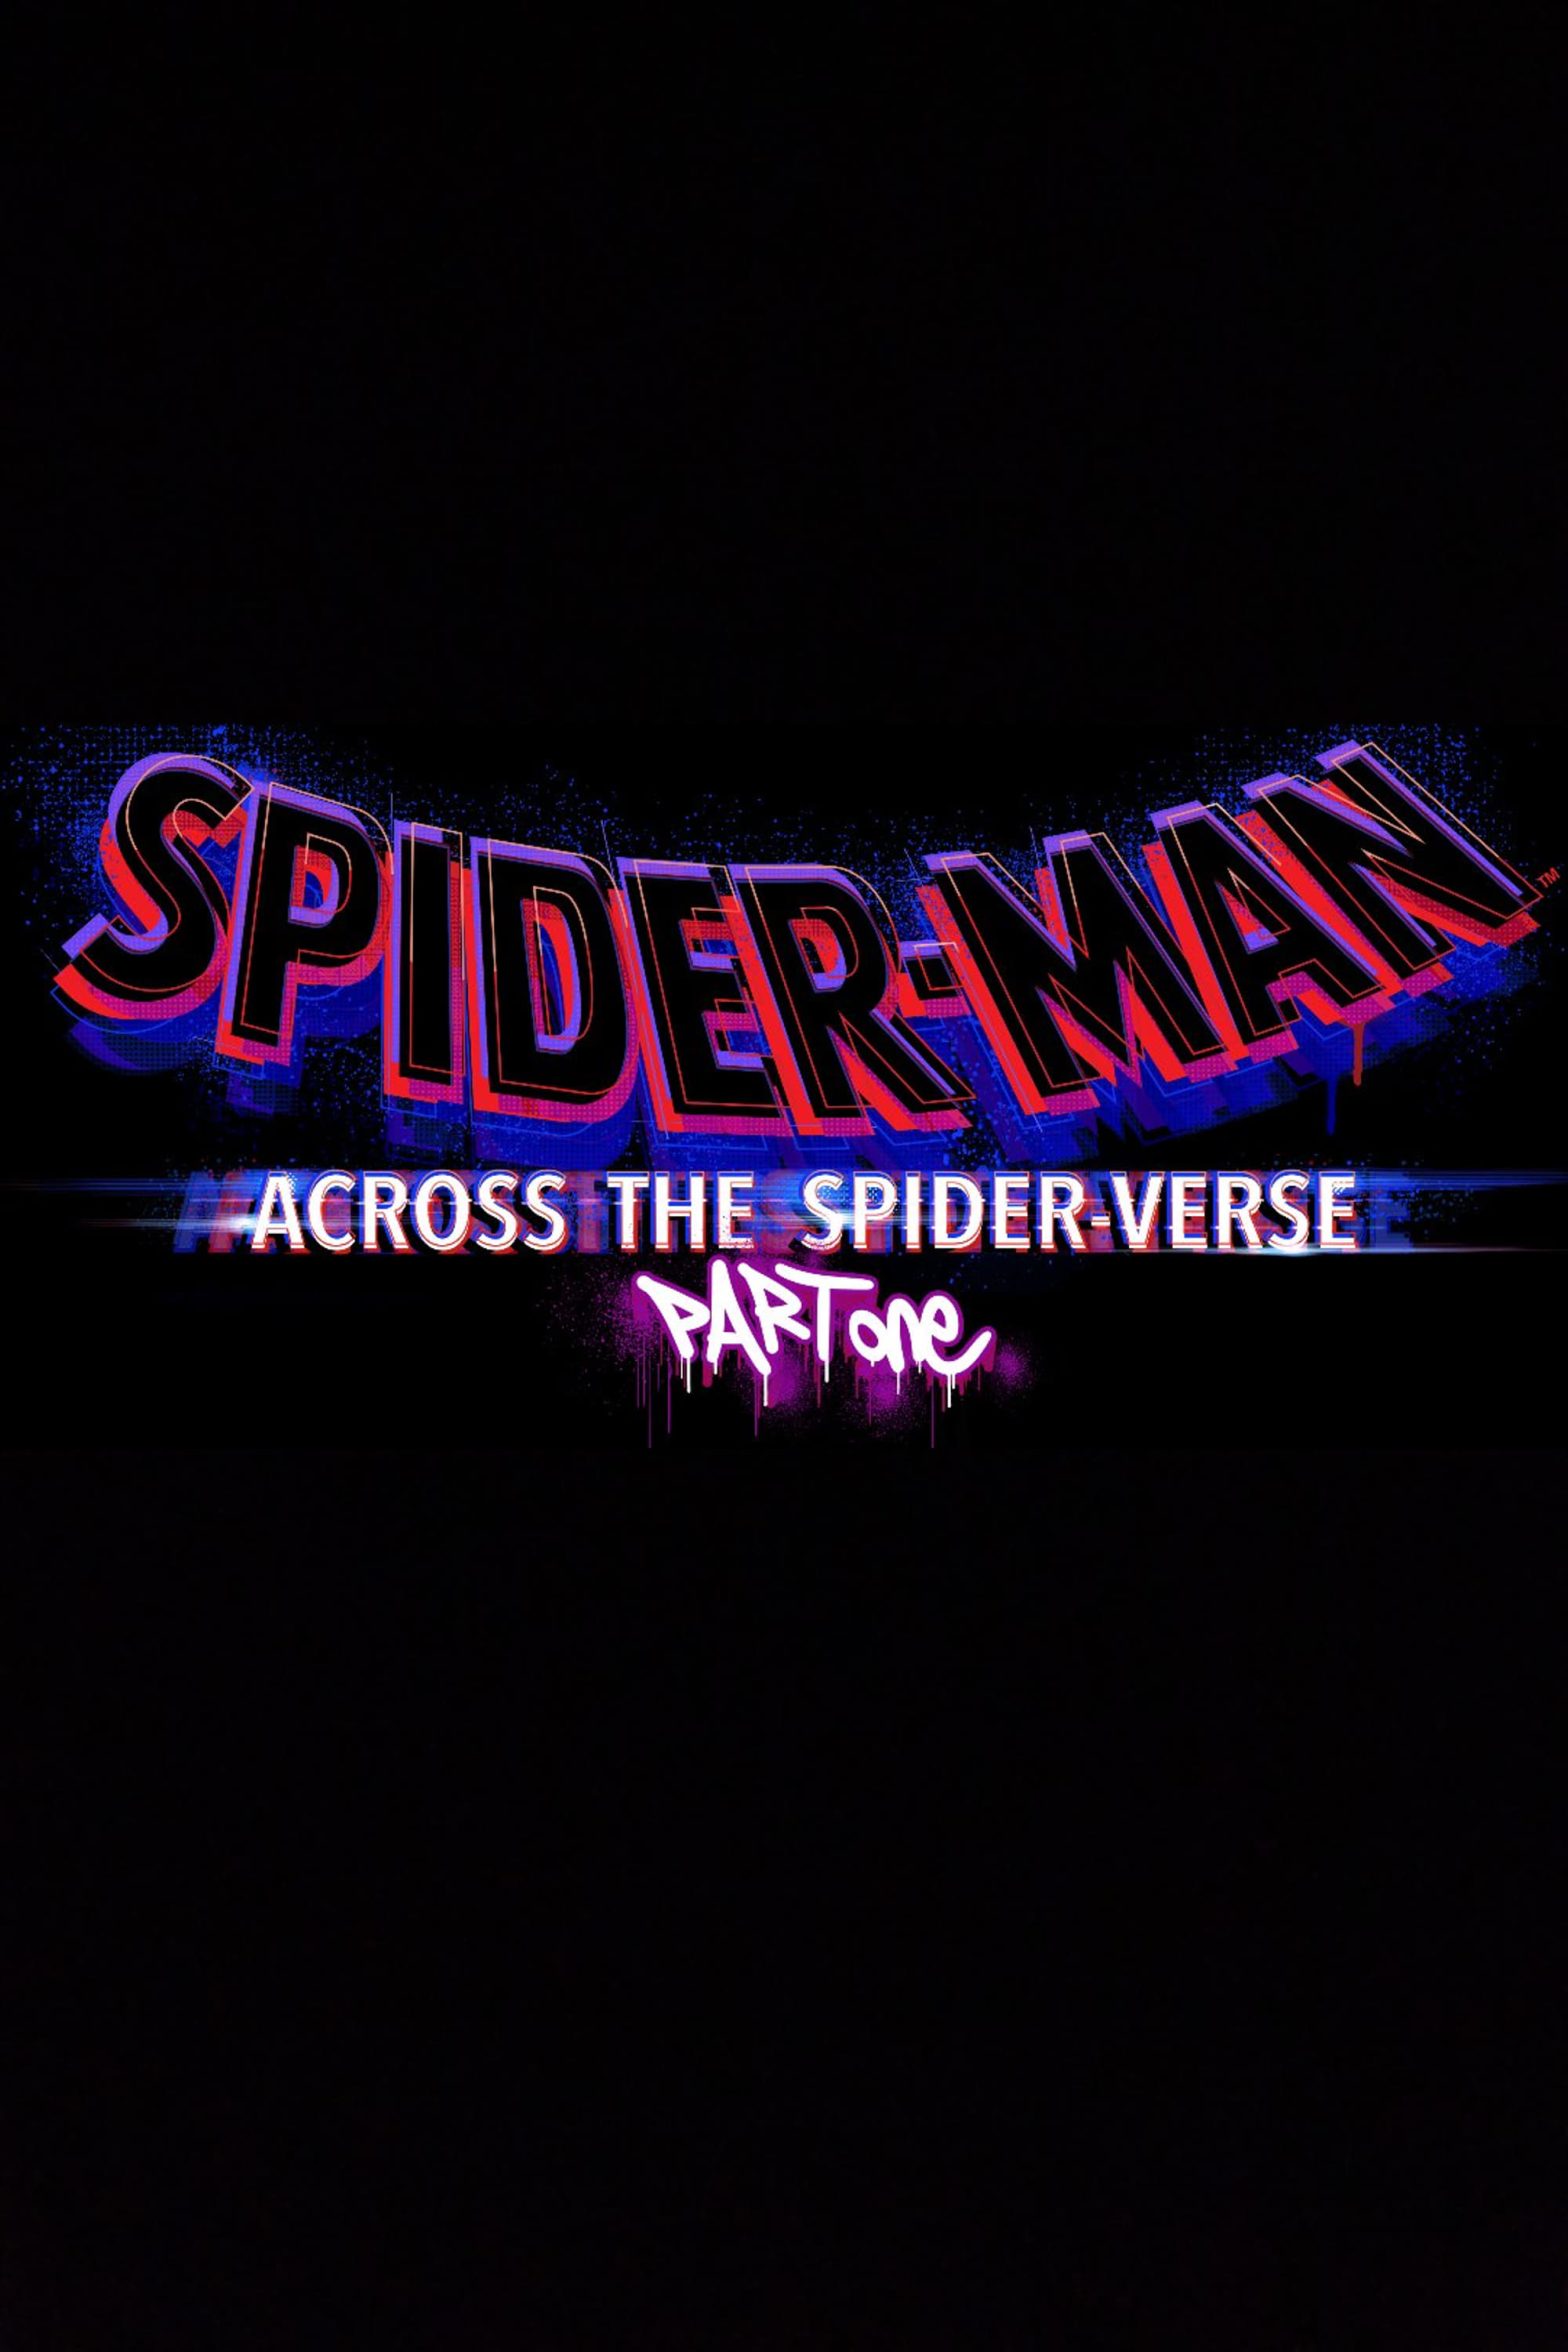 Poster for the movie "Spider-Man: Across the Spider-Verse (Part One)"